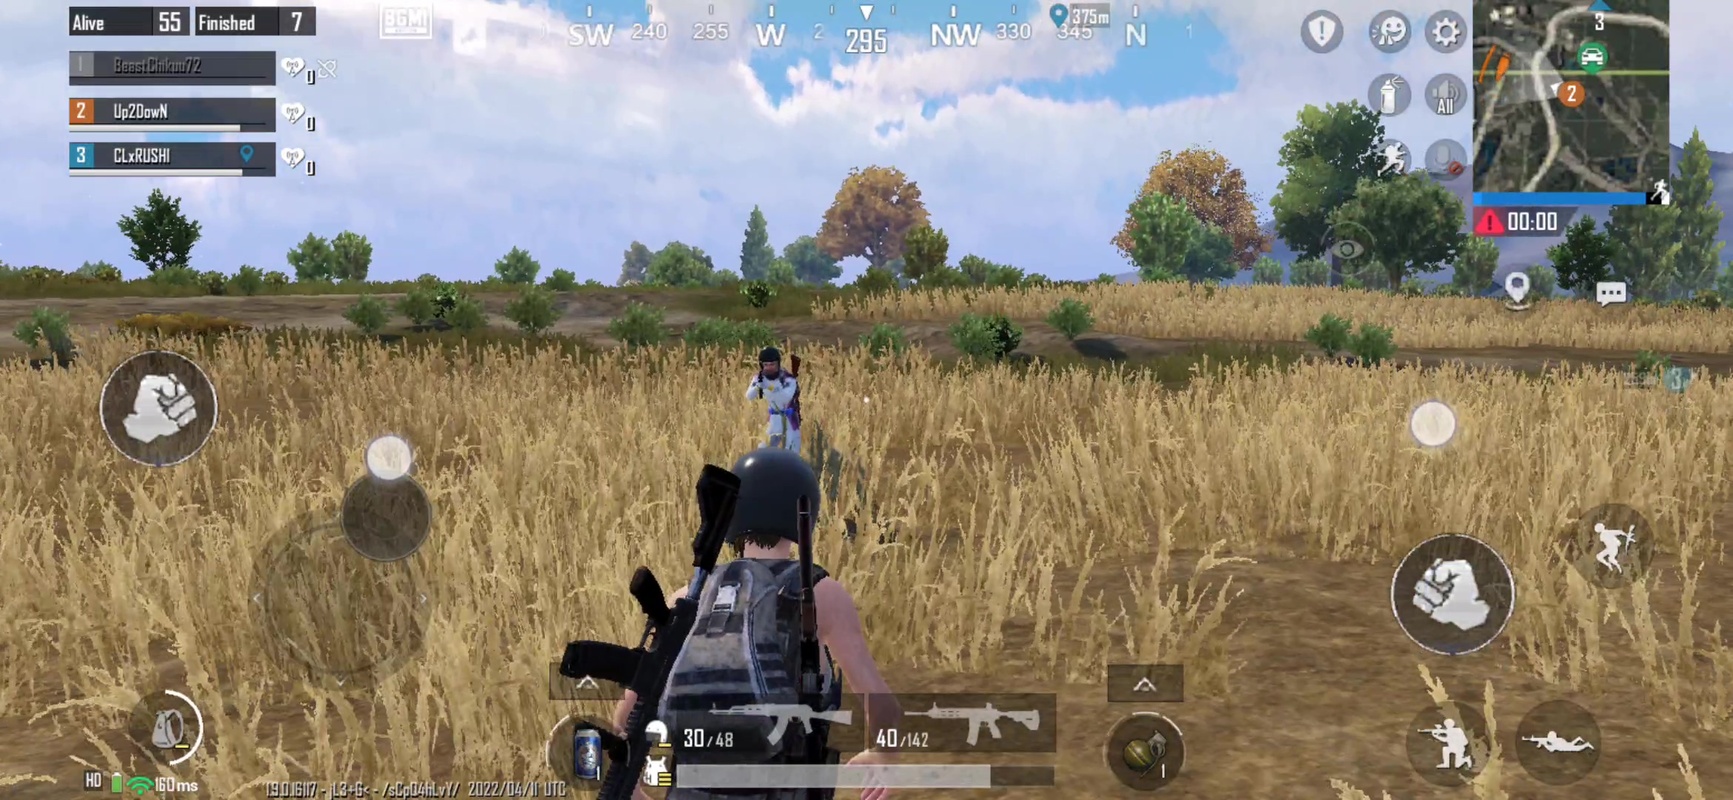 Battlegrounds Mobile India 2.9 APK for Android Screenshot 4